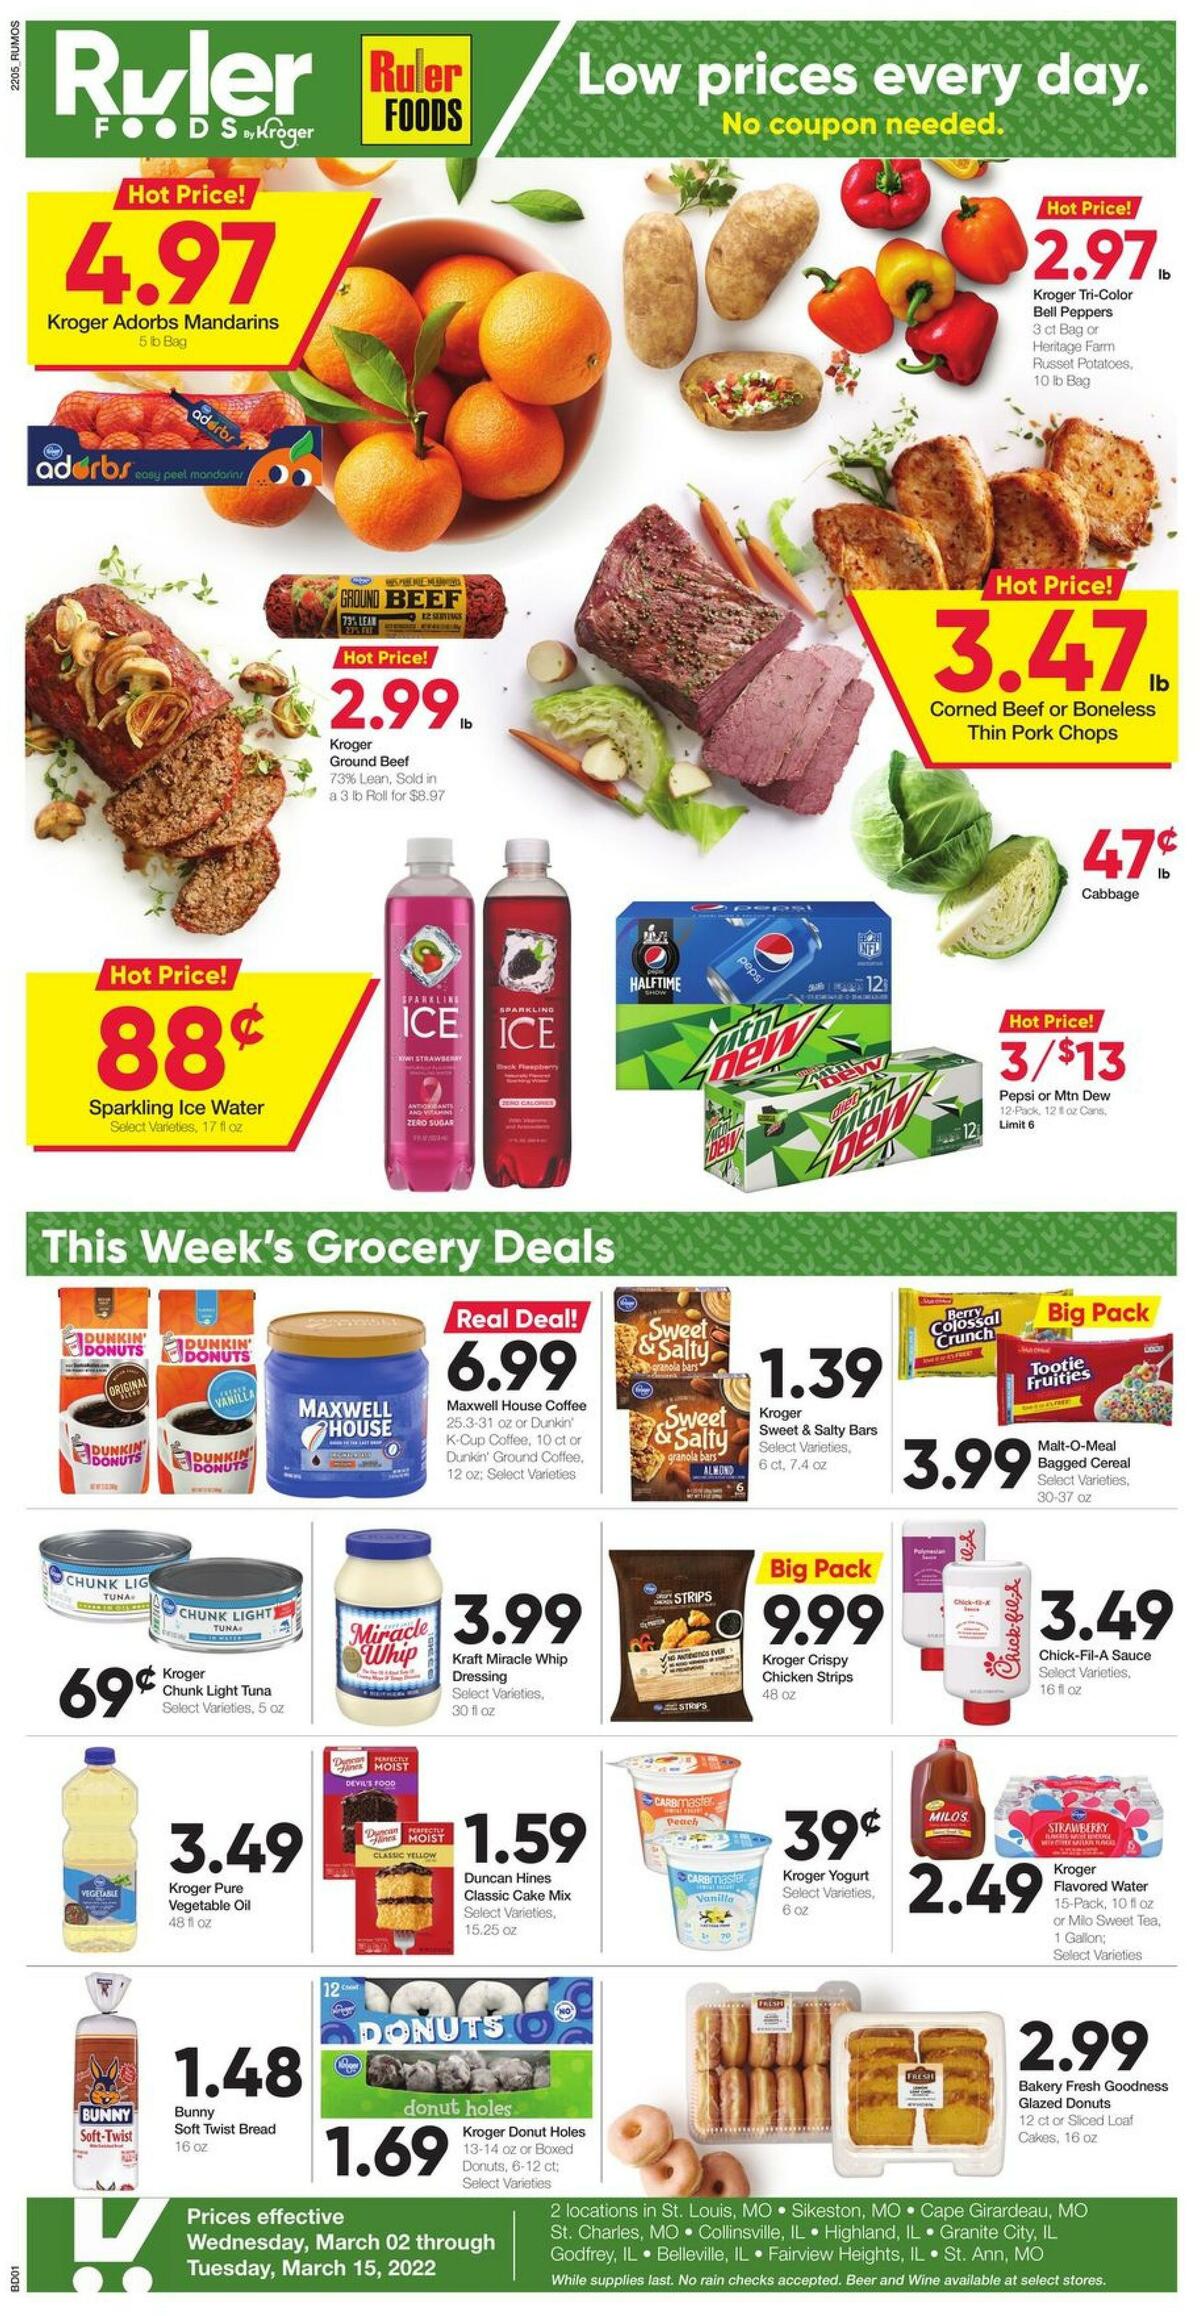 Ruler Foods Weekly Ad from March 2